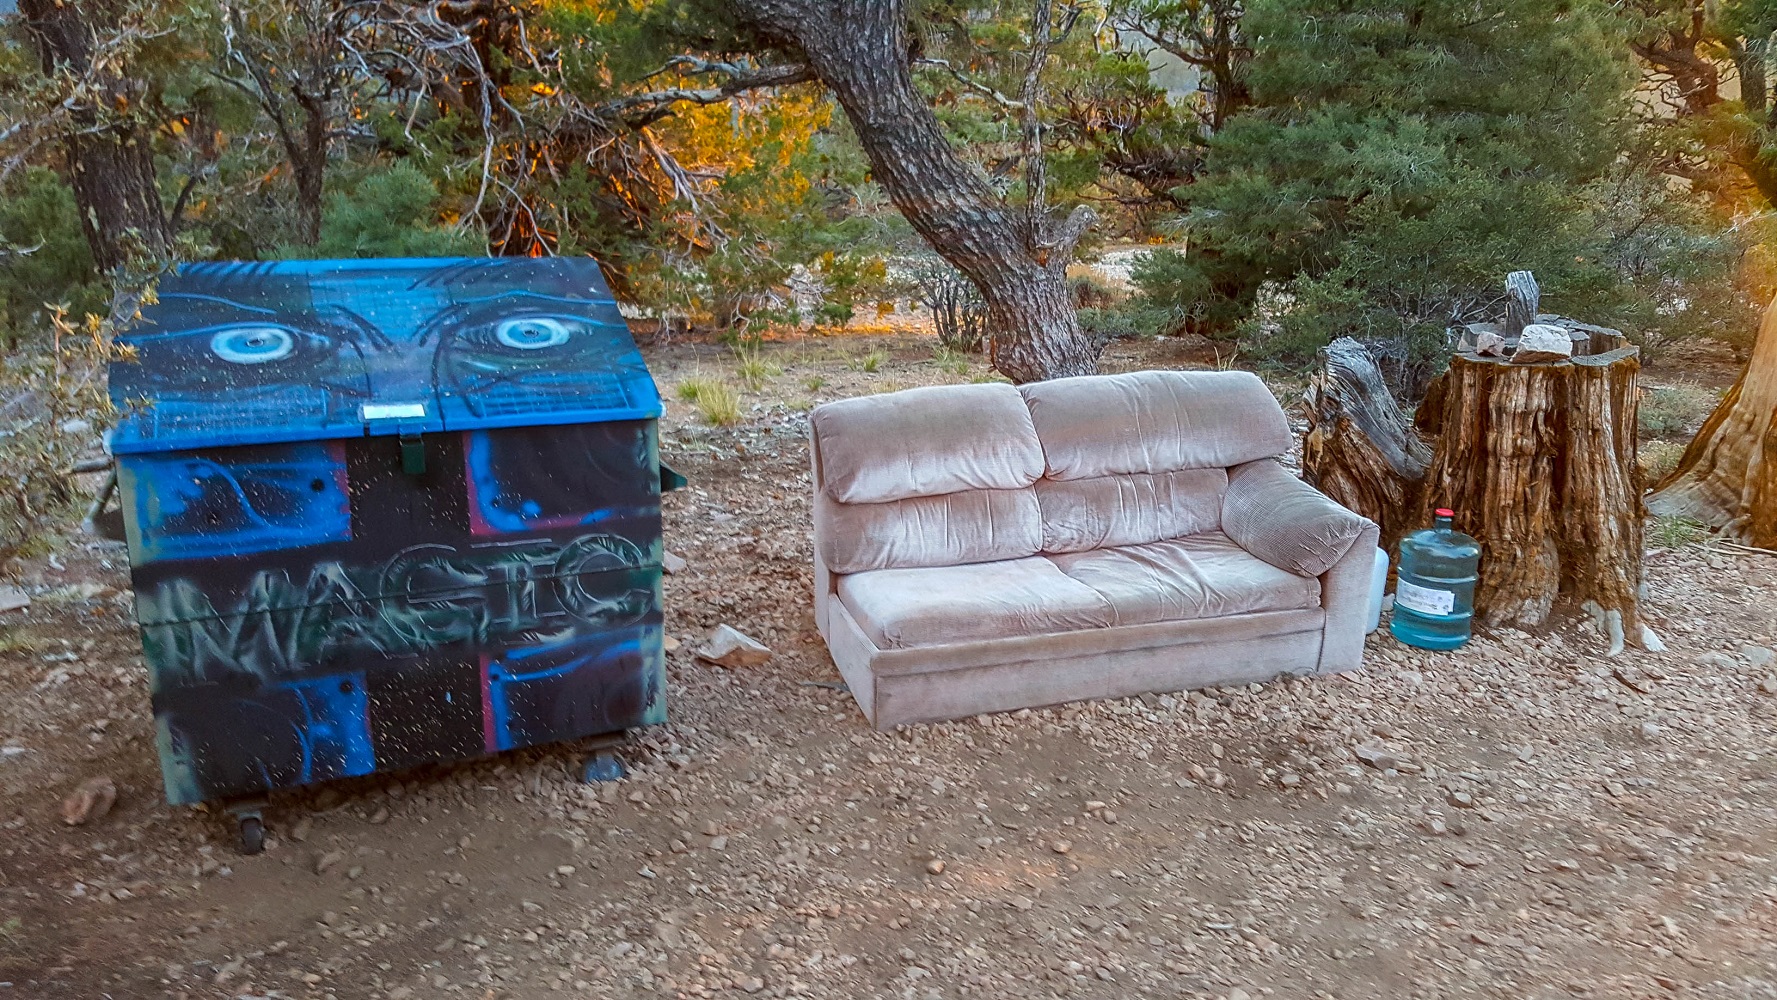 May 5 - dumpster couch